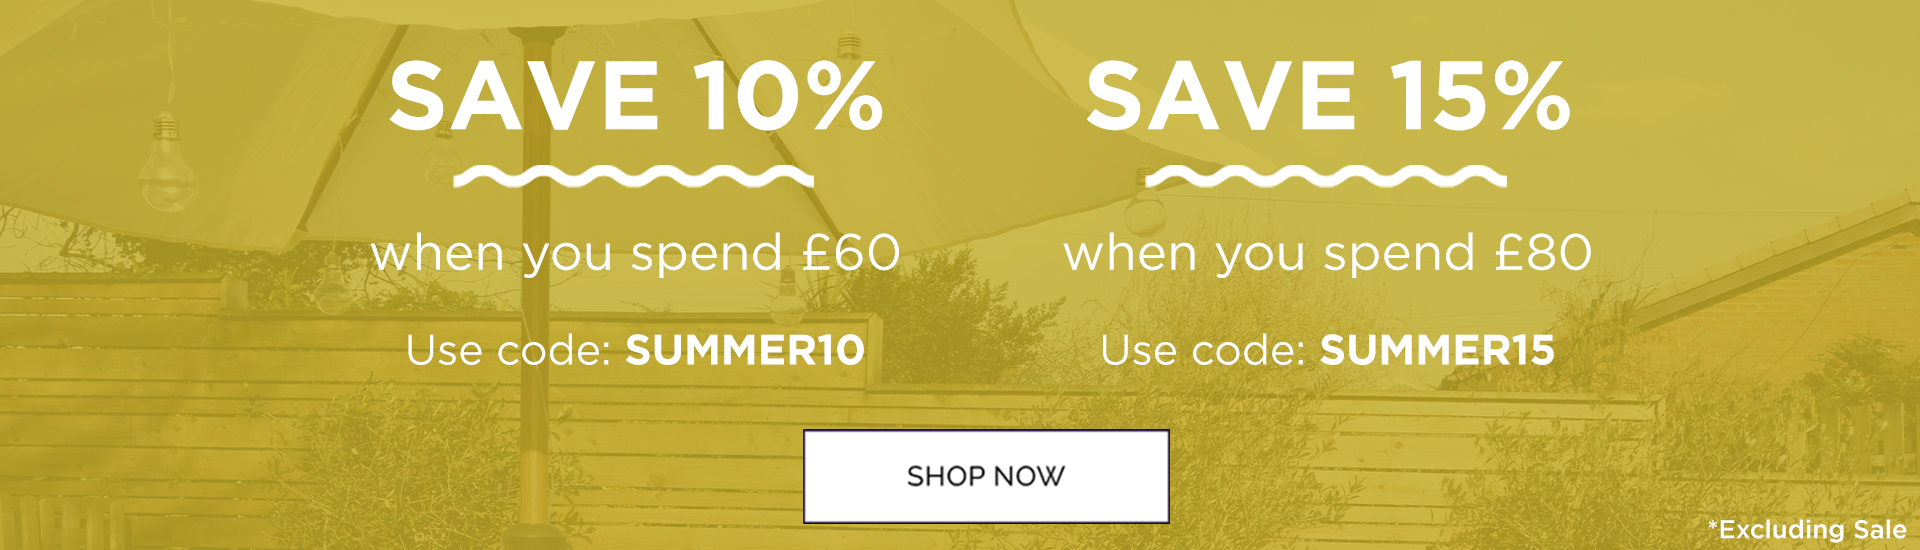 Save 10% When You Spend £60 | Use Code: SUMMER10 | Save 15% When You Spend £80 | Use Code: SUMMER15 | Shop Now